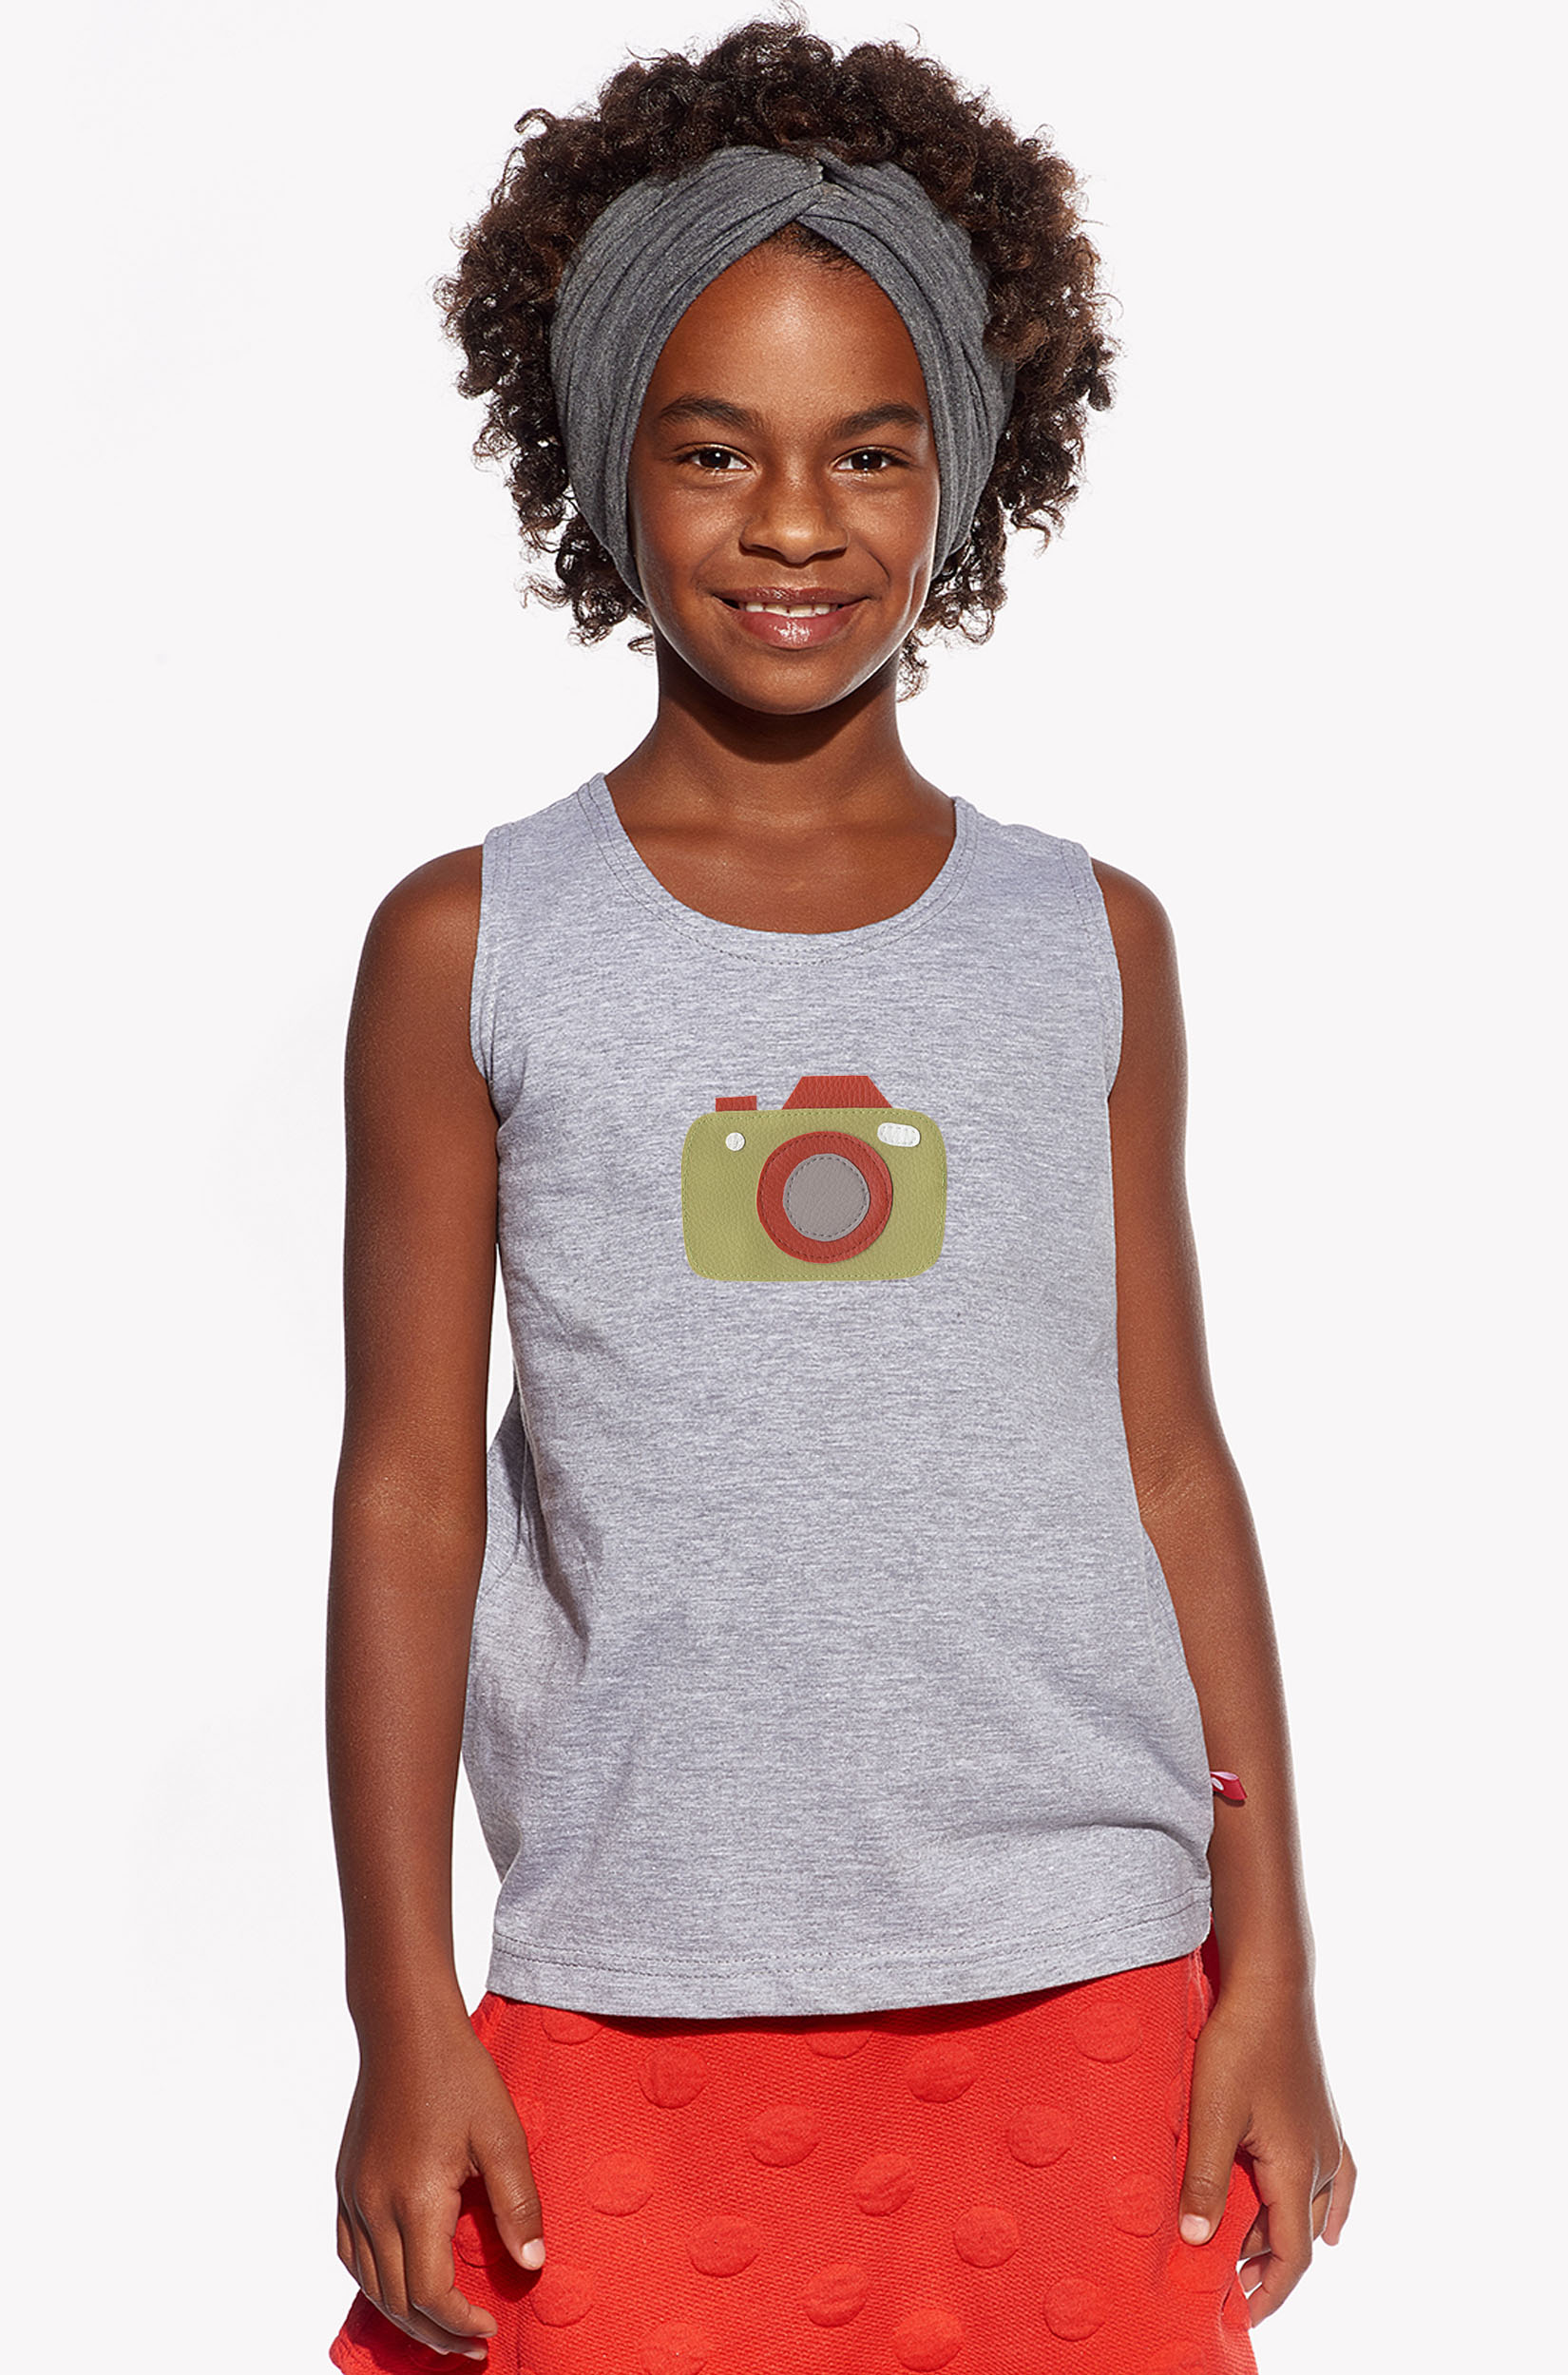 Singlet with camera